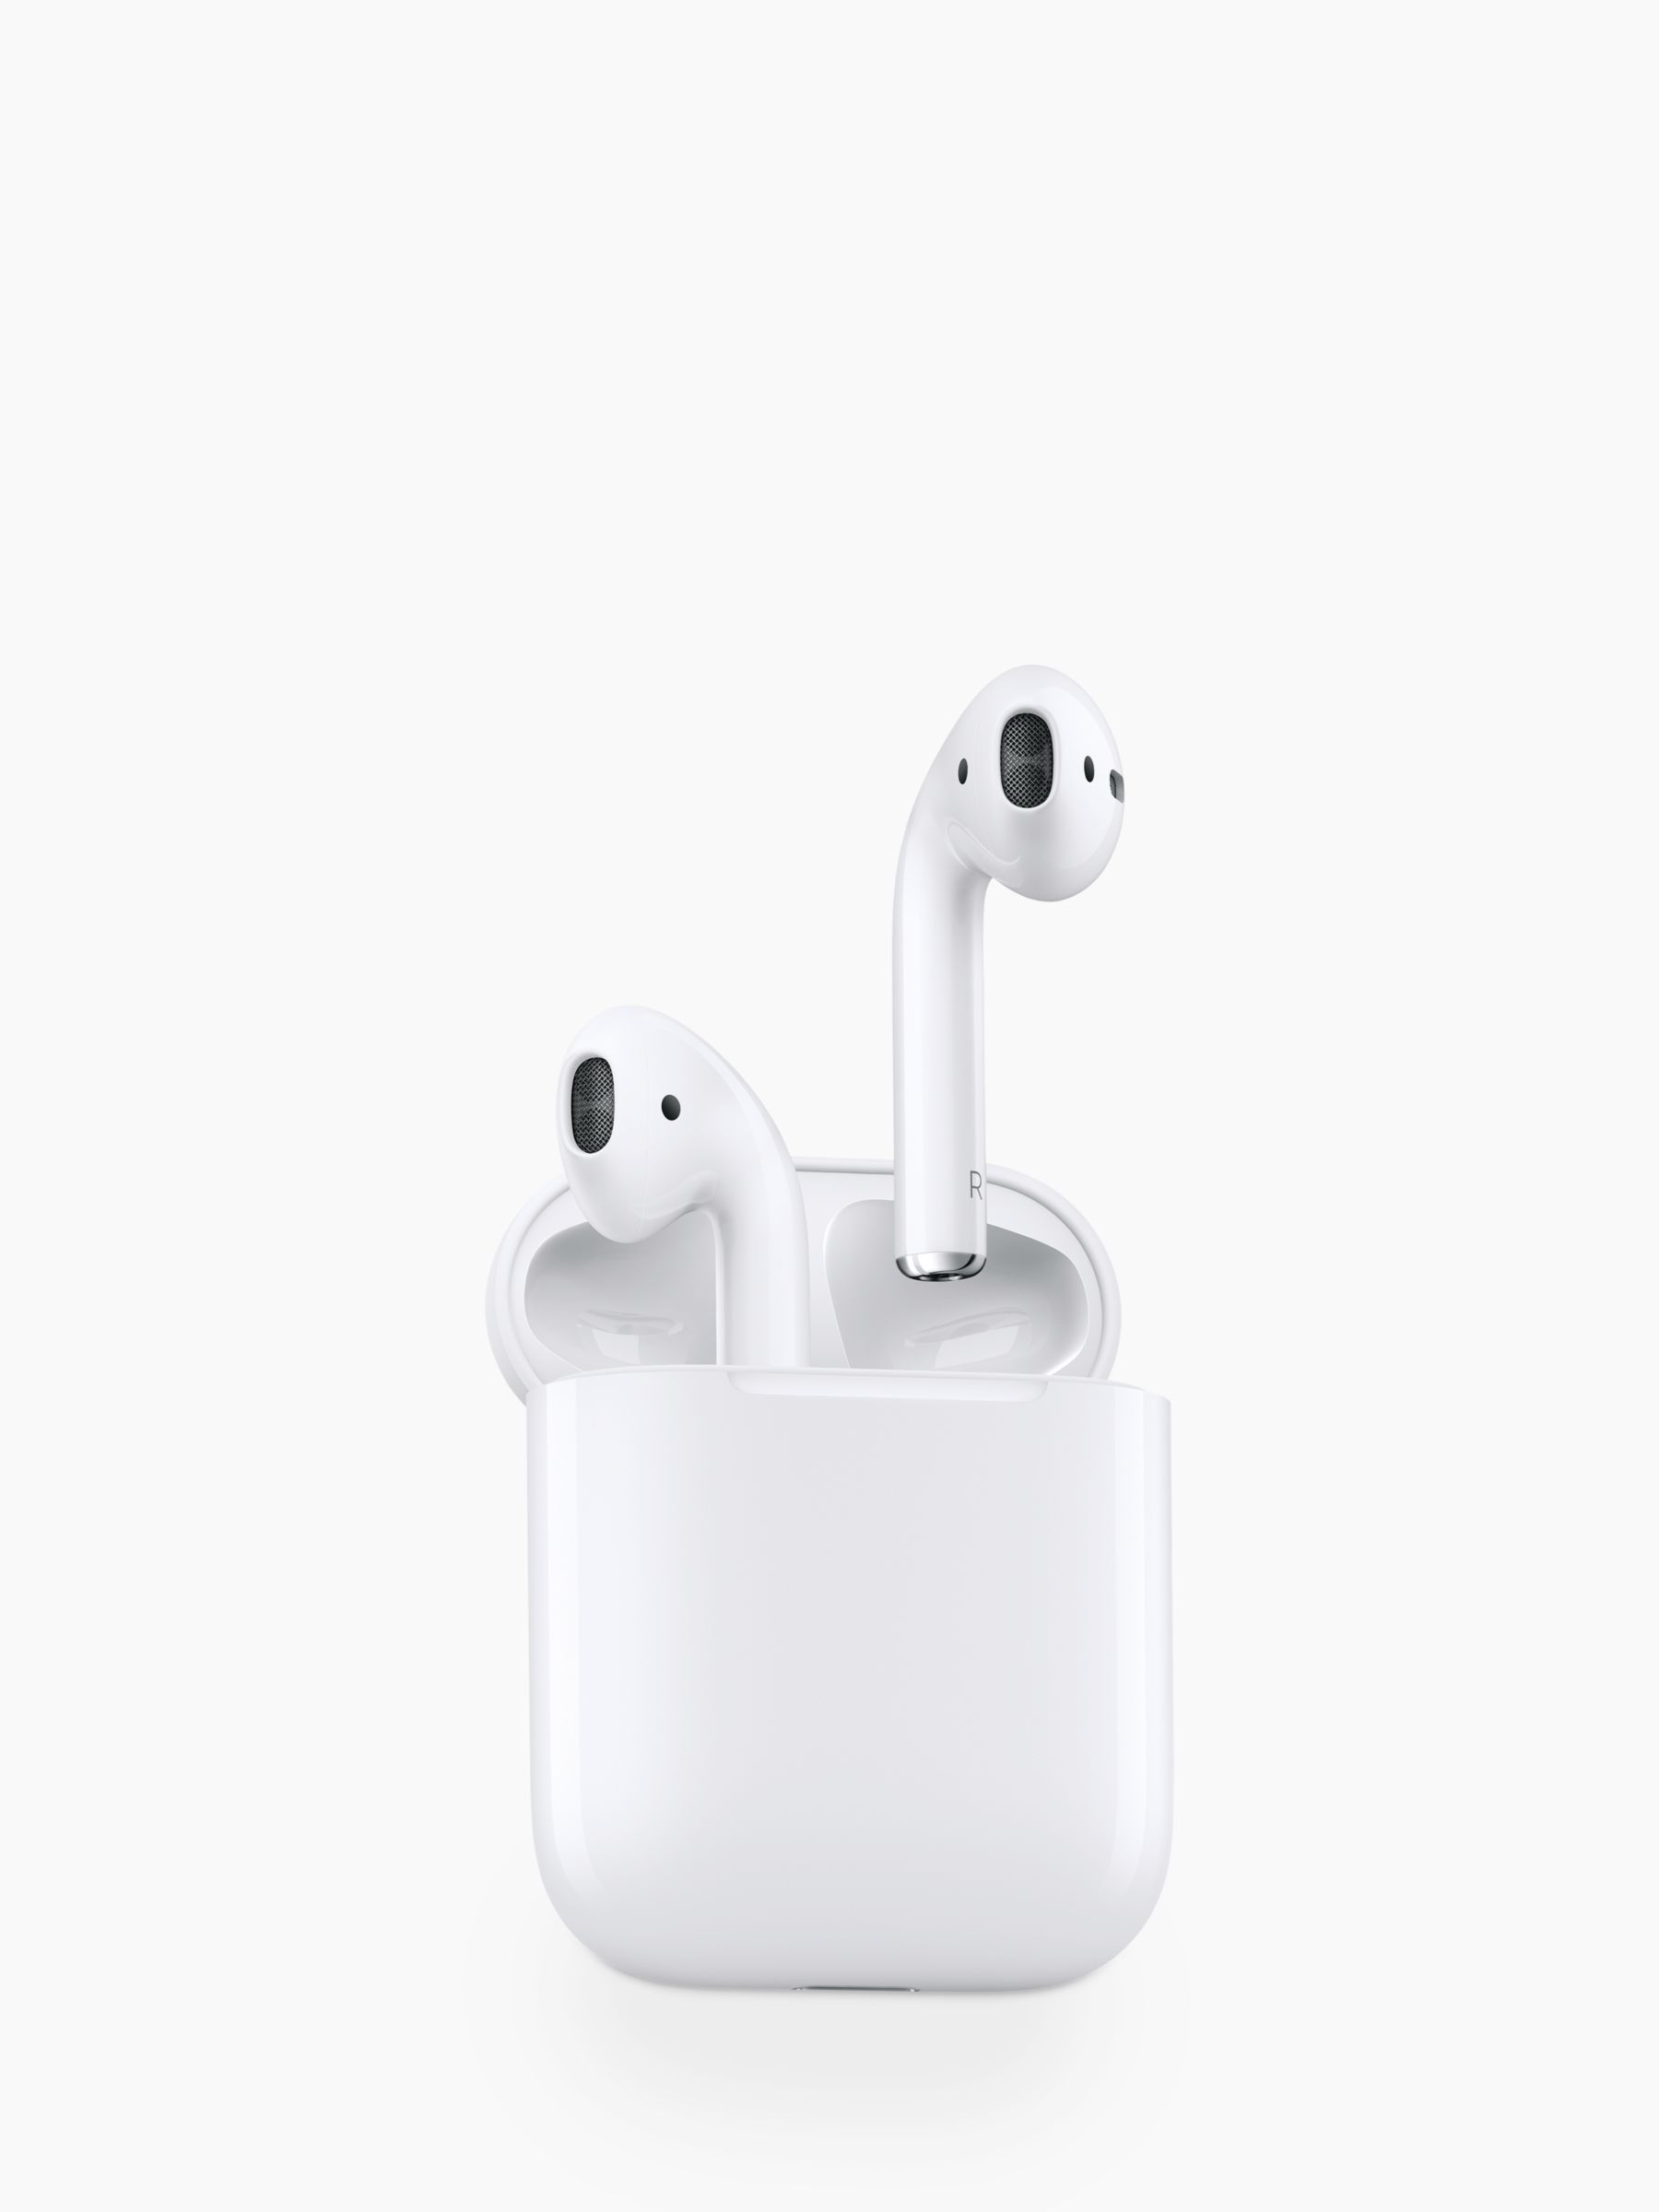 Forhandle Lighed champignon 2016 Apple AirPods with Charging Case